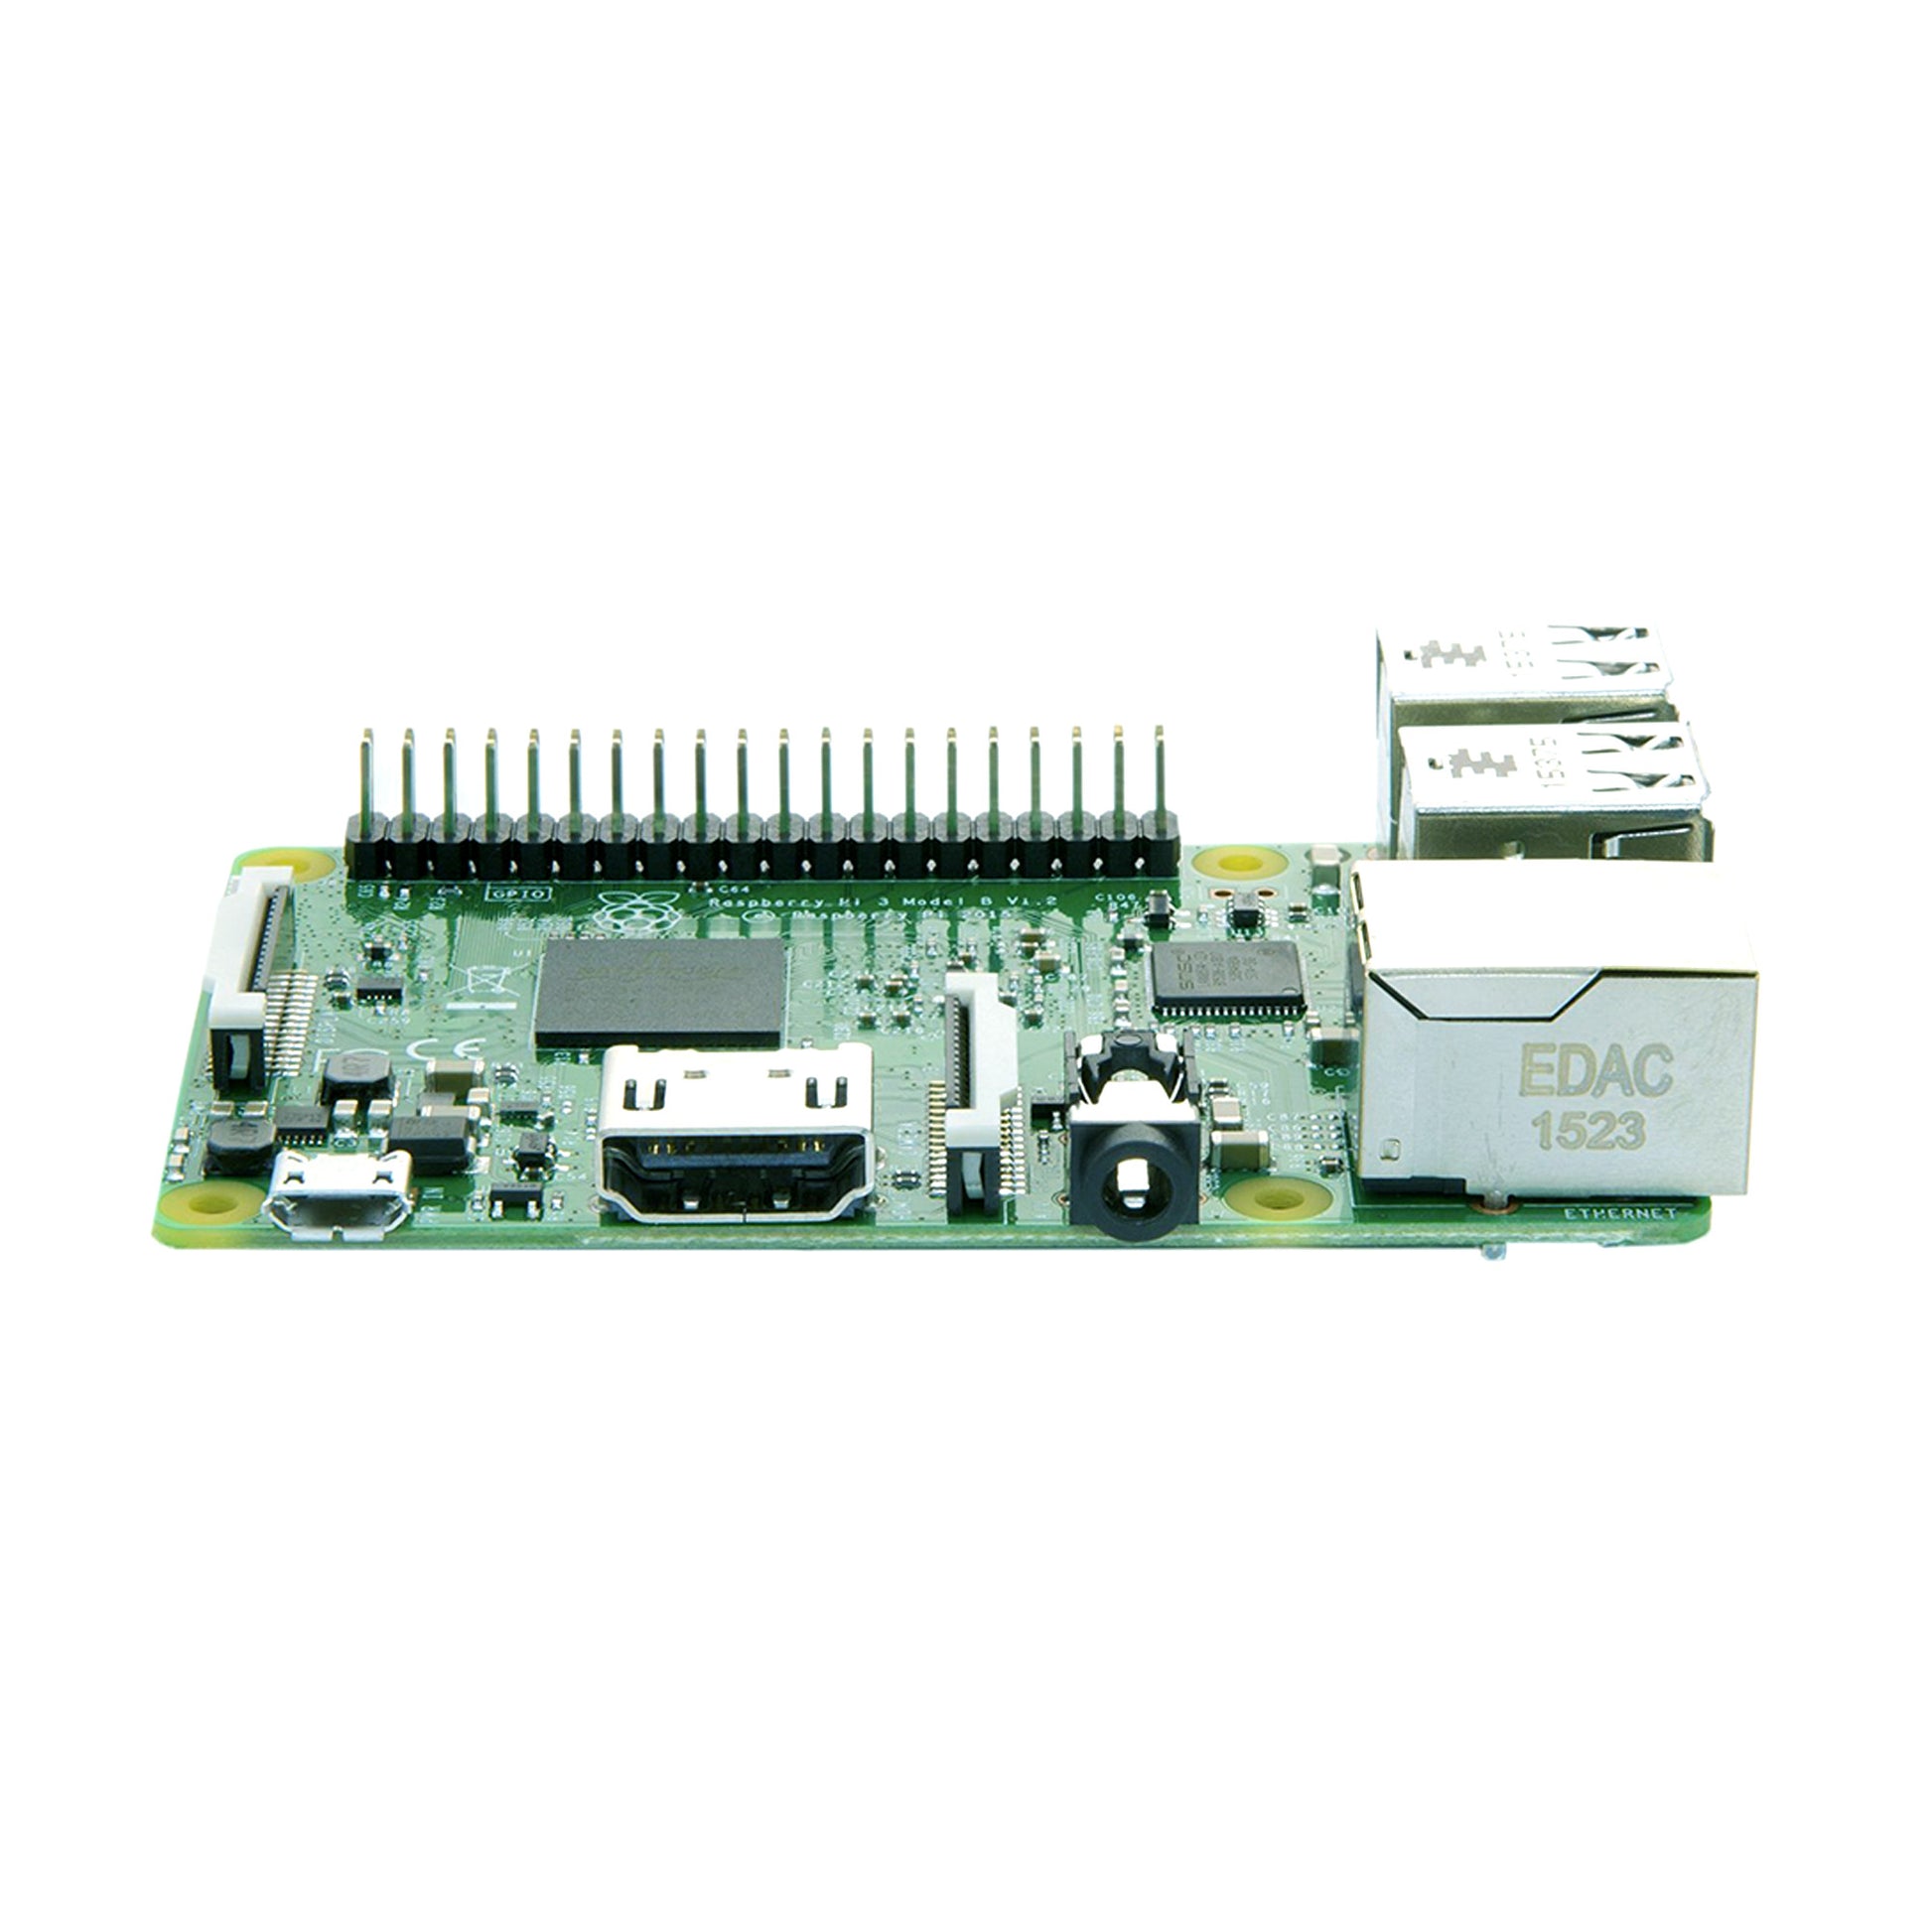 Raspberry Pi 3 Model B Motherboard with Broadcom BCM2387 chipset and 1.2GHz and Quad-Core ARM Cortex-A53 - RP009 - REES52